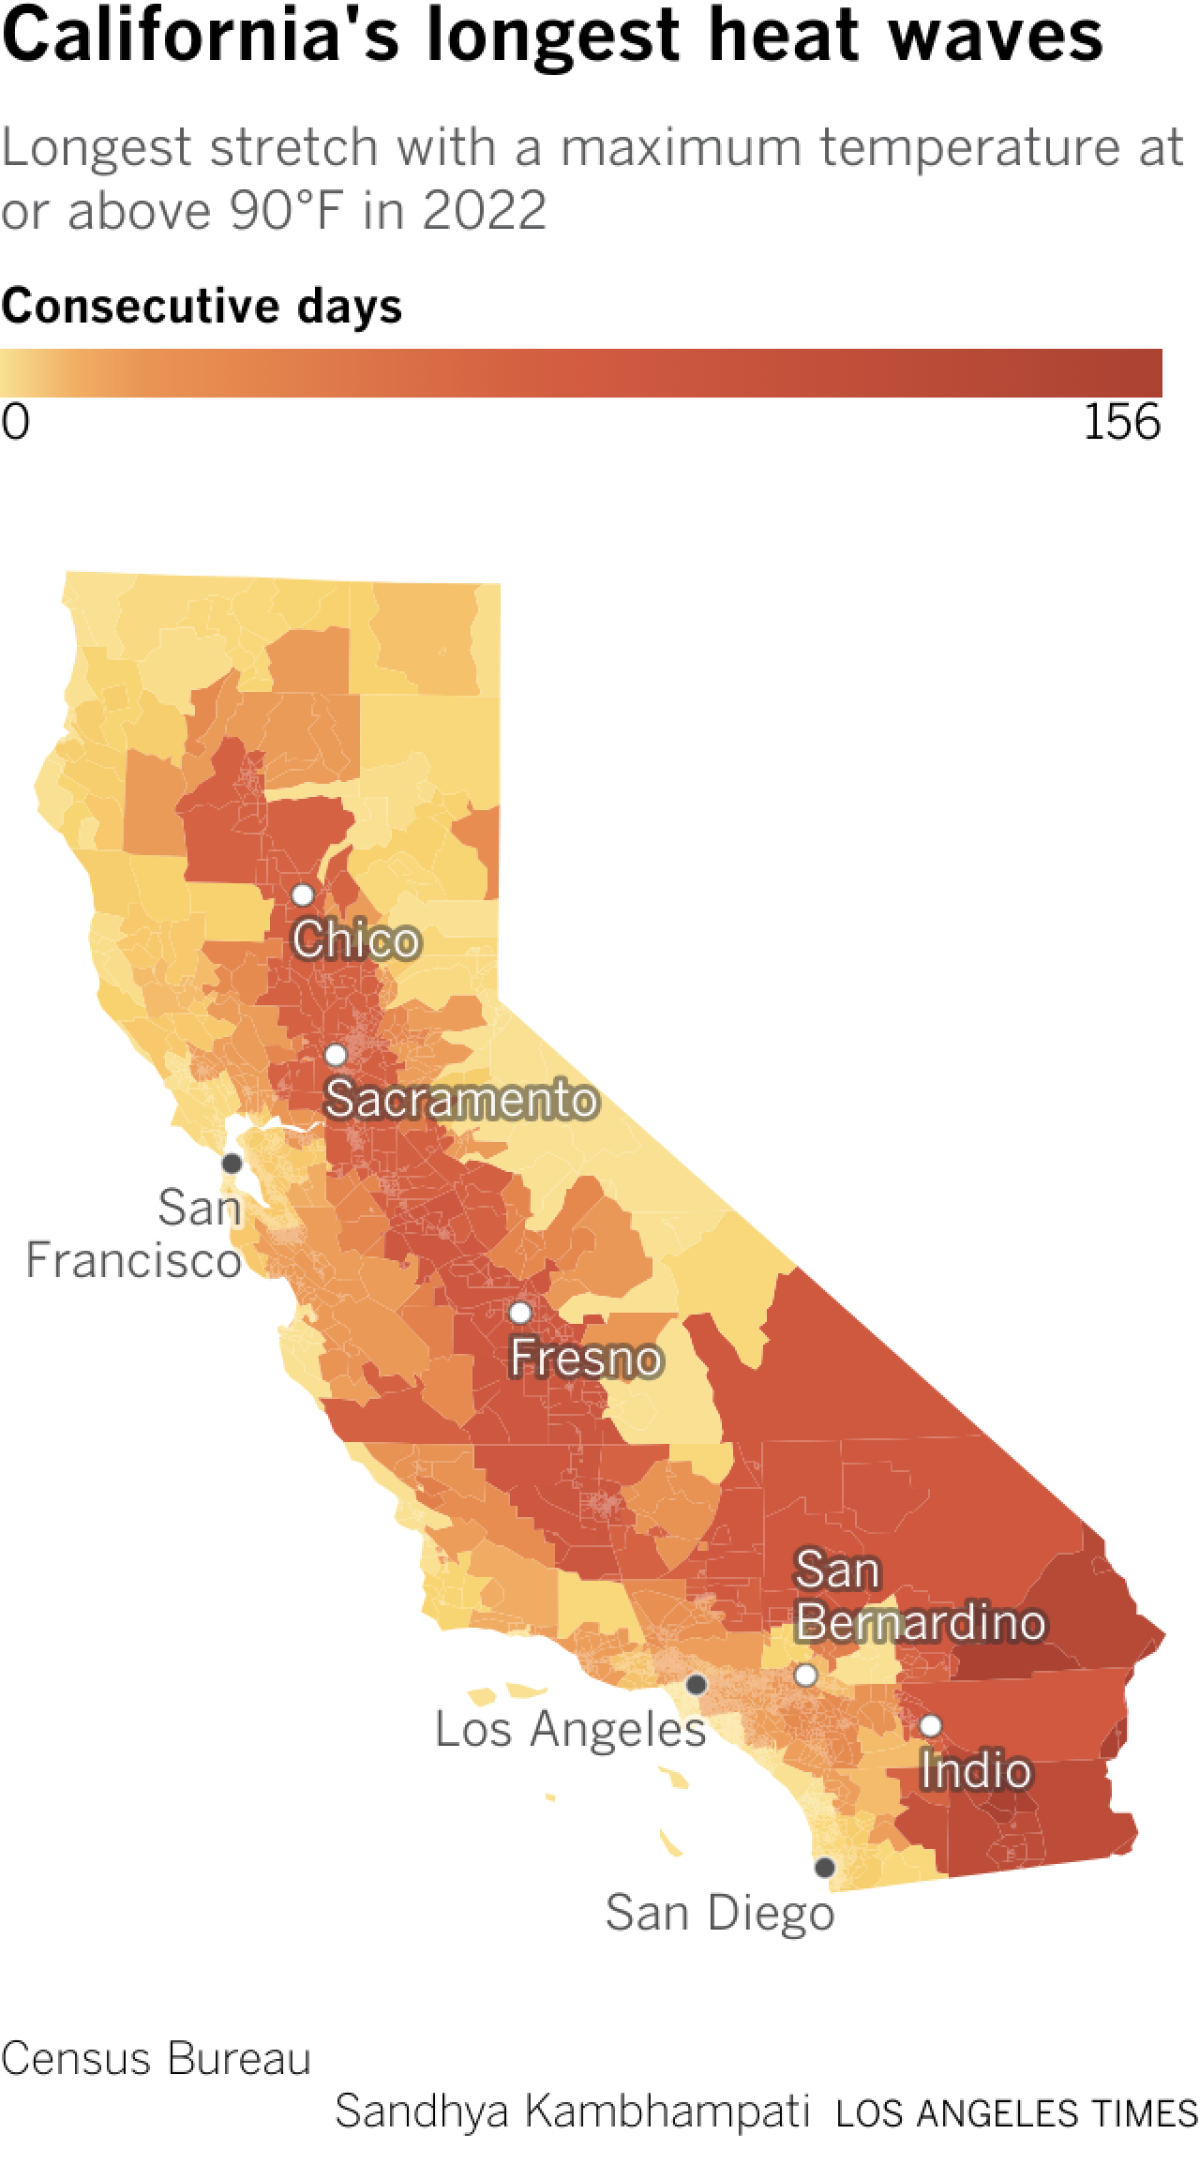 Map of California census tracts showing the longest stretch with a maximum temperature at or above 90 degrees Fahrenheit